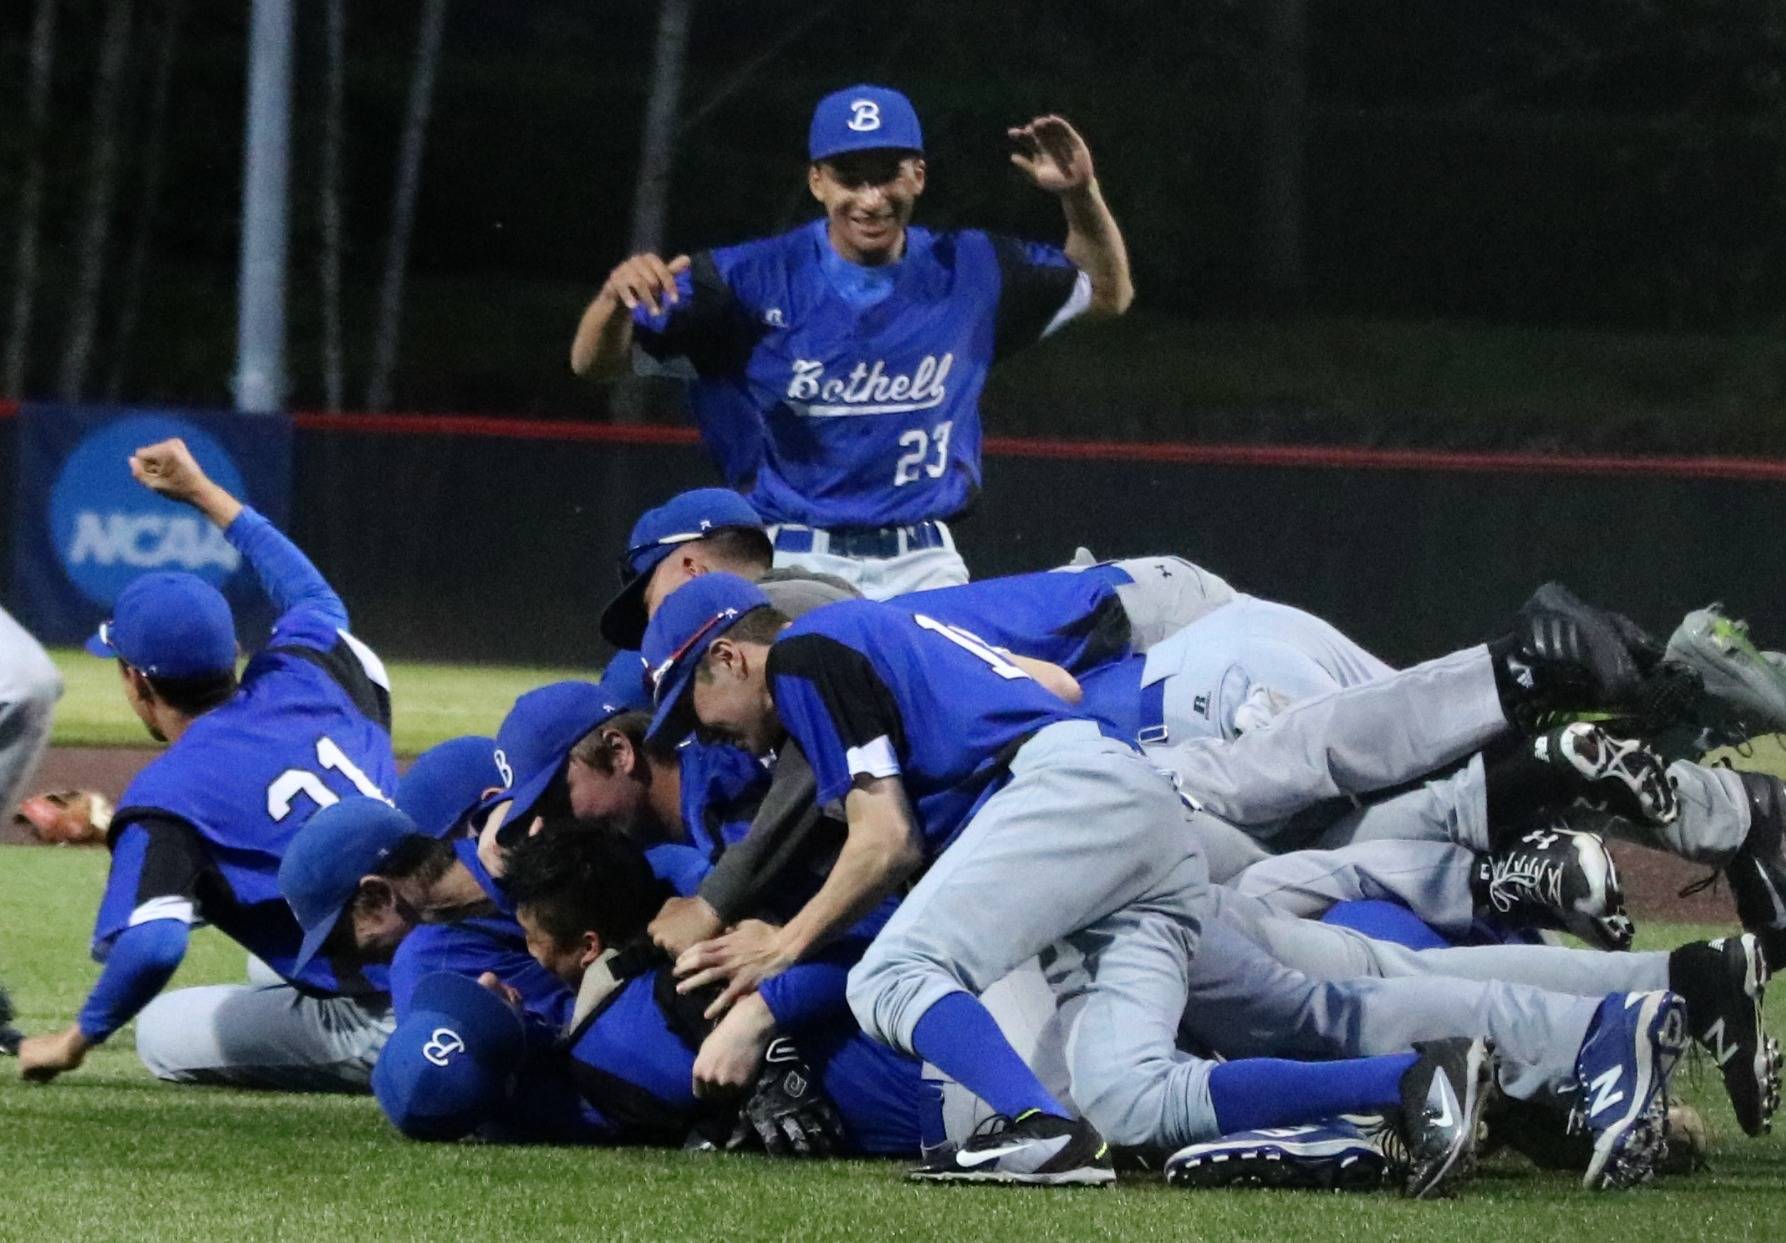 Bothell beats Issaquah, 2-0, for 4A KingCo baseball title